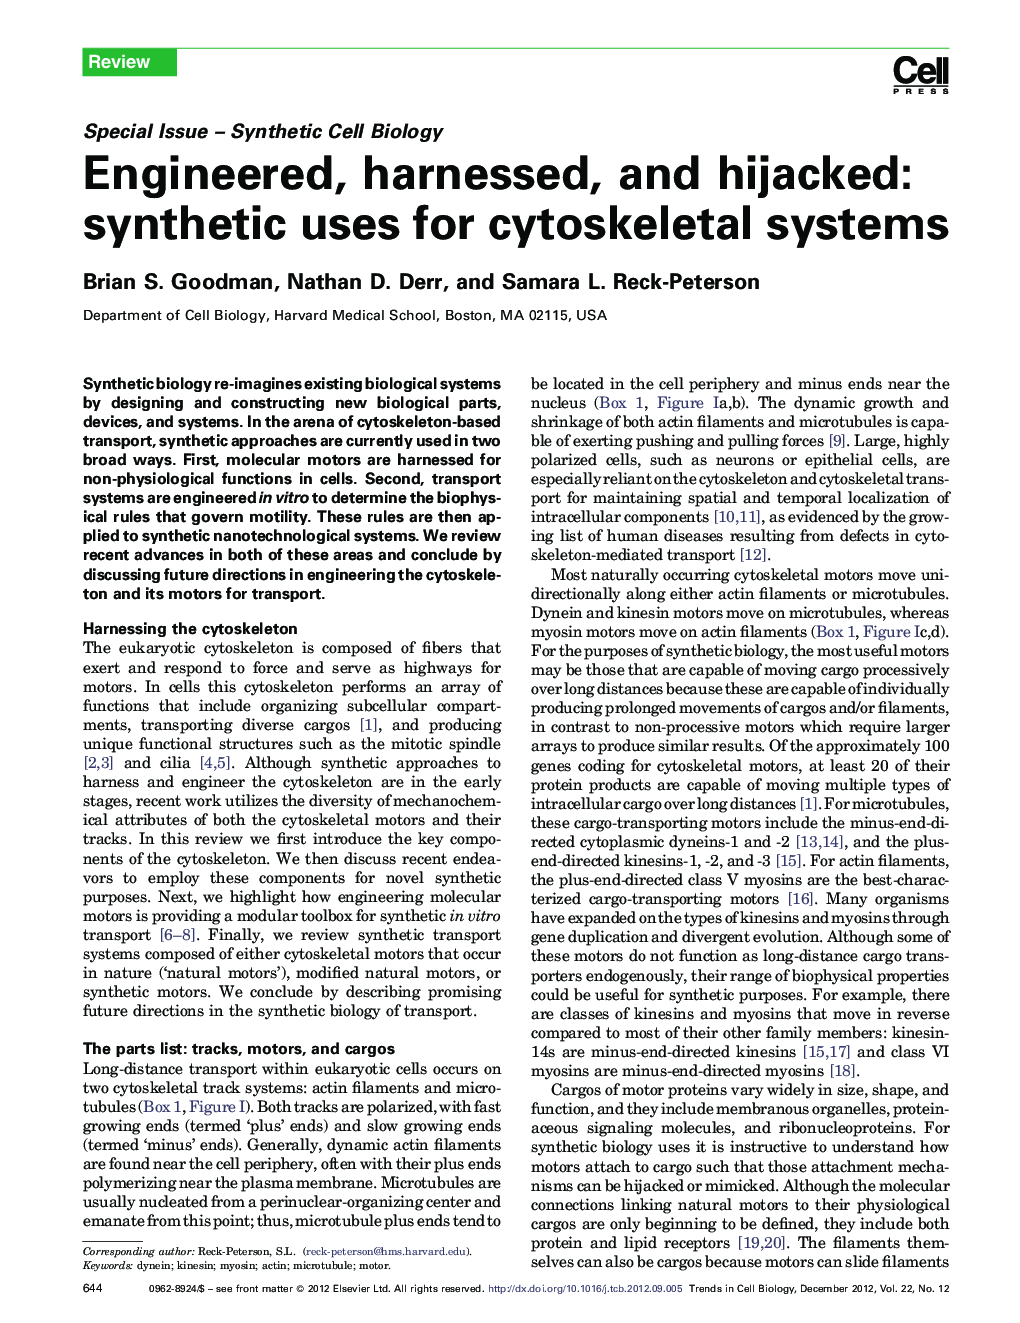 Engineered, harnessed, and hijacked: synthetic uses for cytoskeletal systems